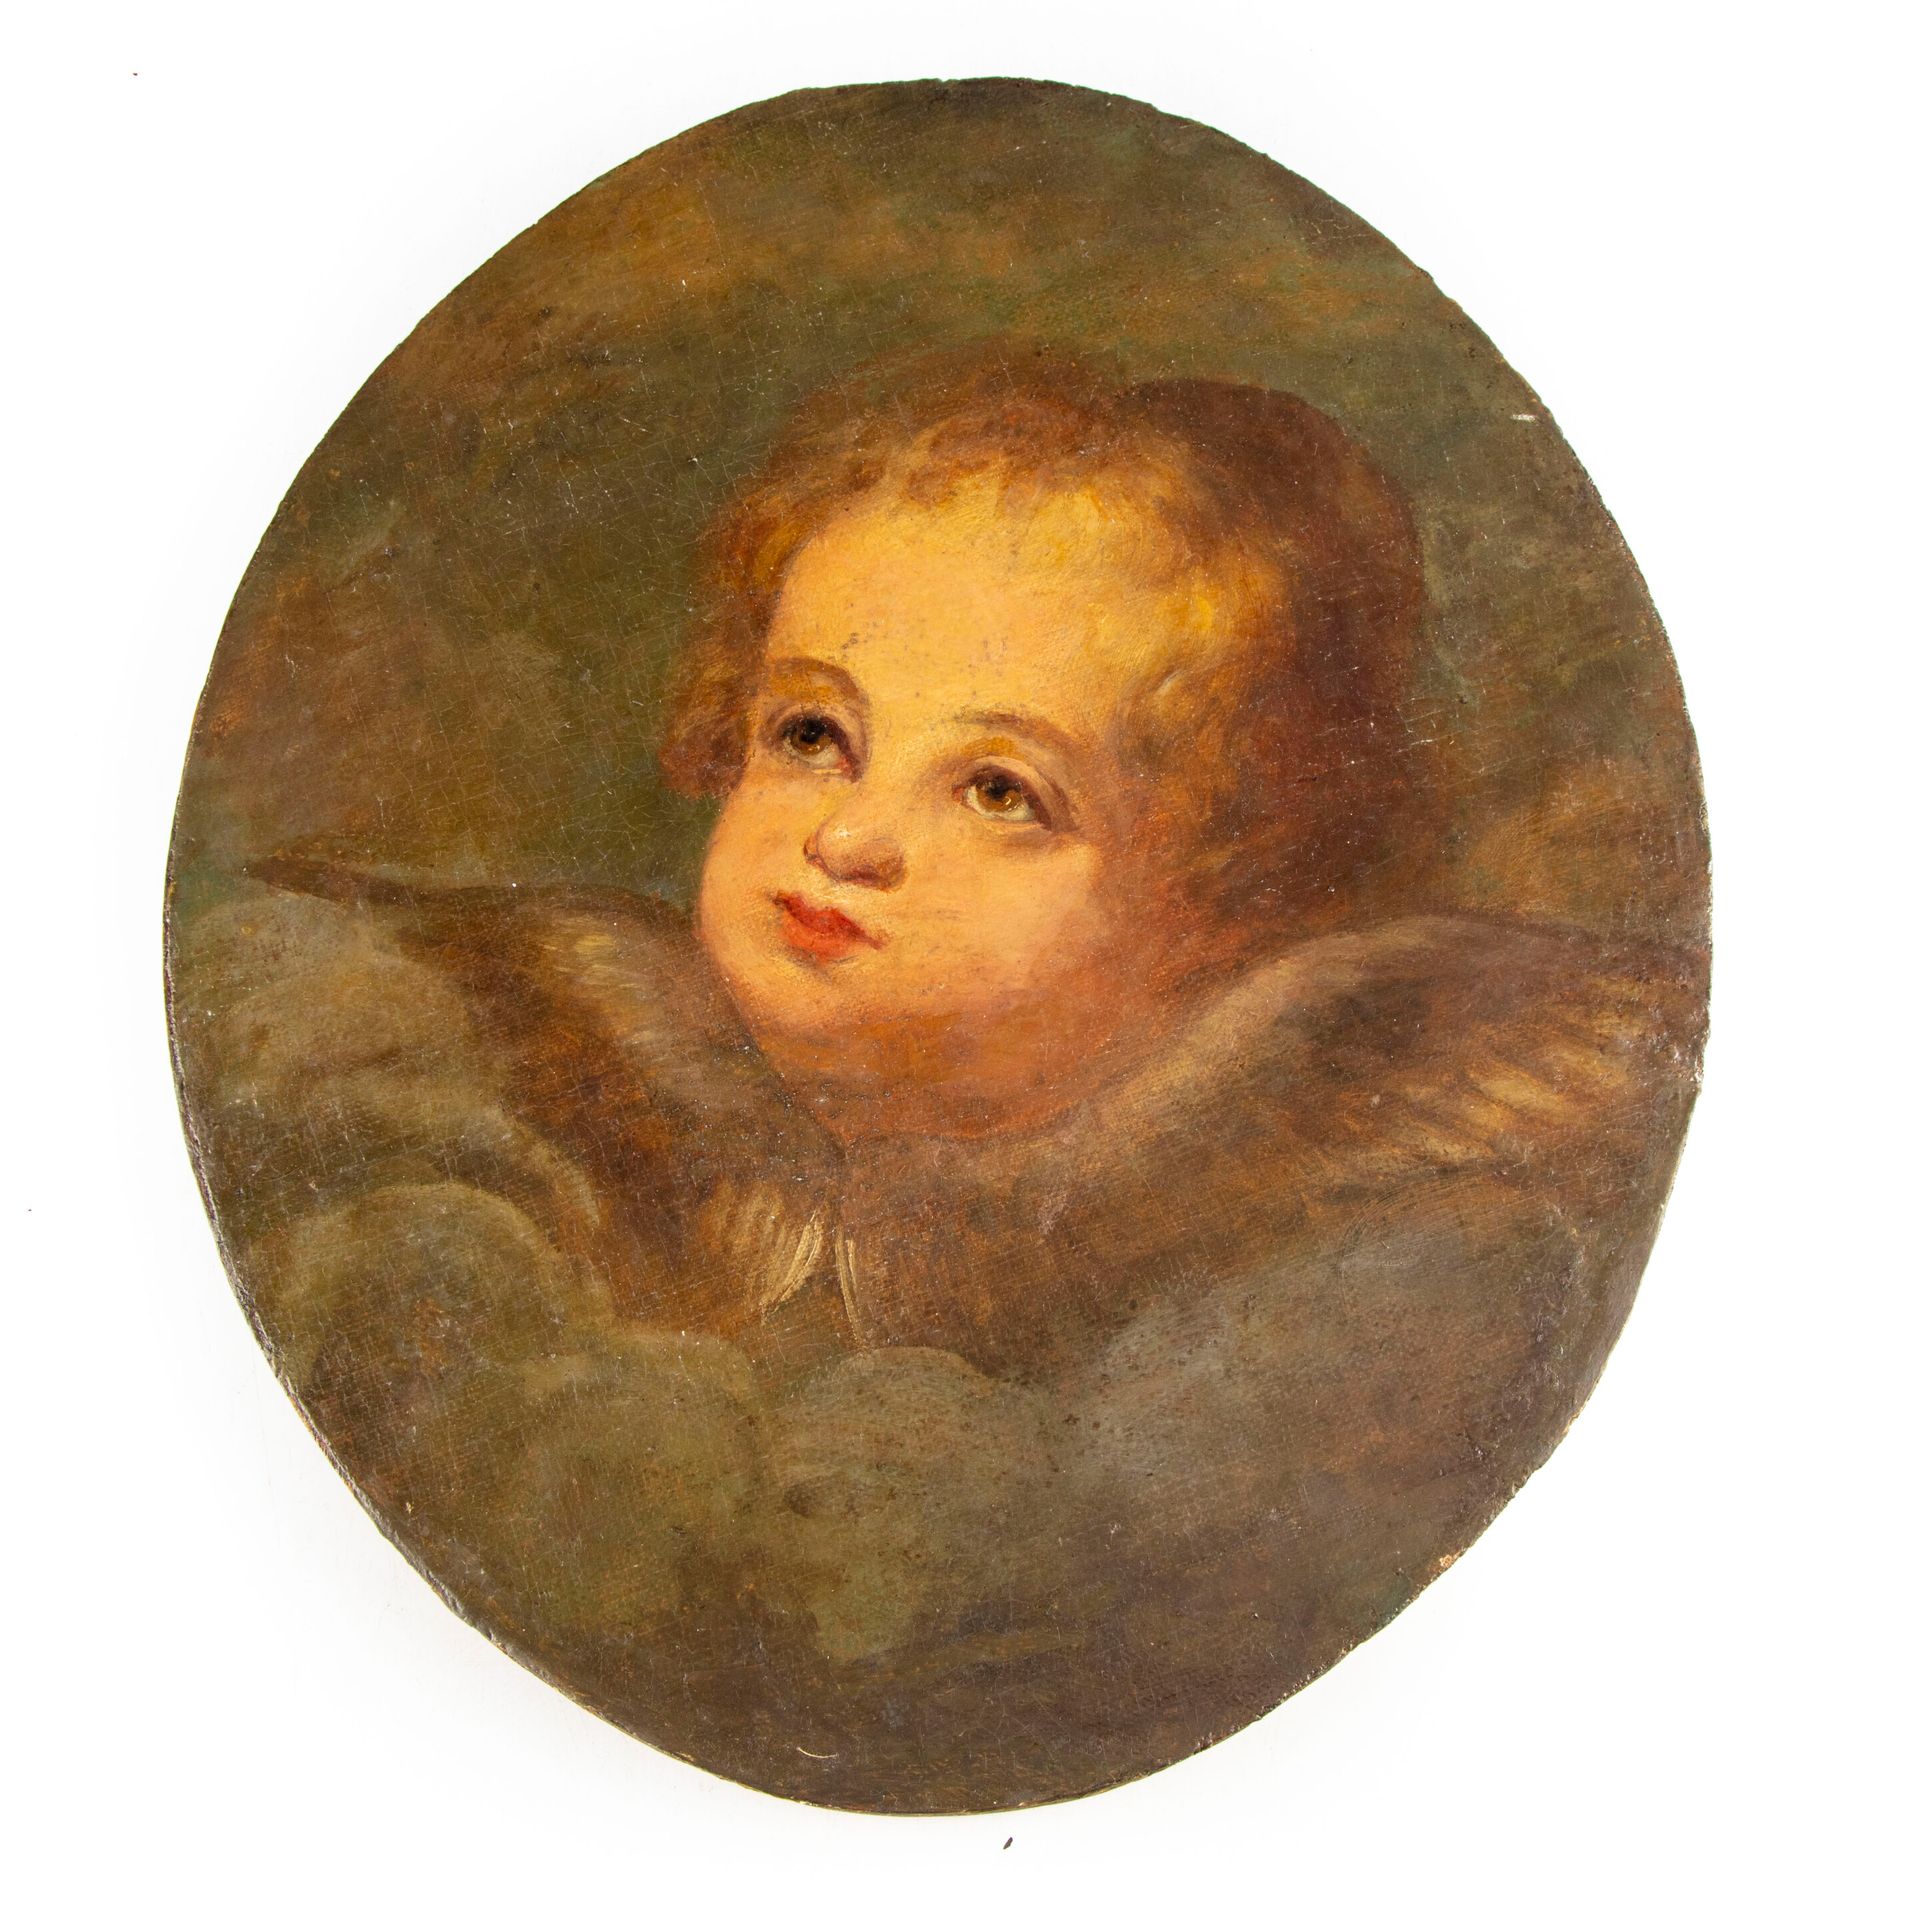 ECOLE FRANCAISE french school of the 18th century

Head of a cherub 

Oil on can&hellip;